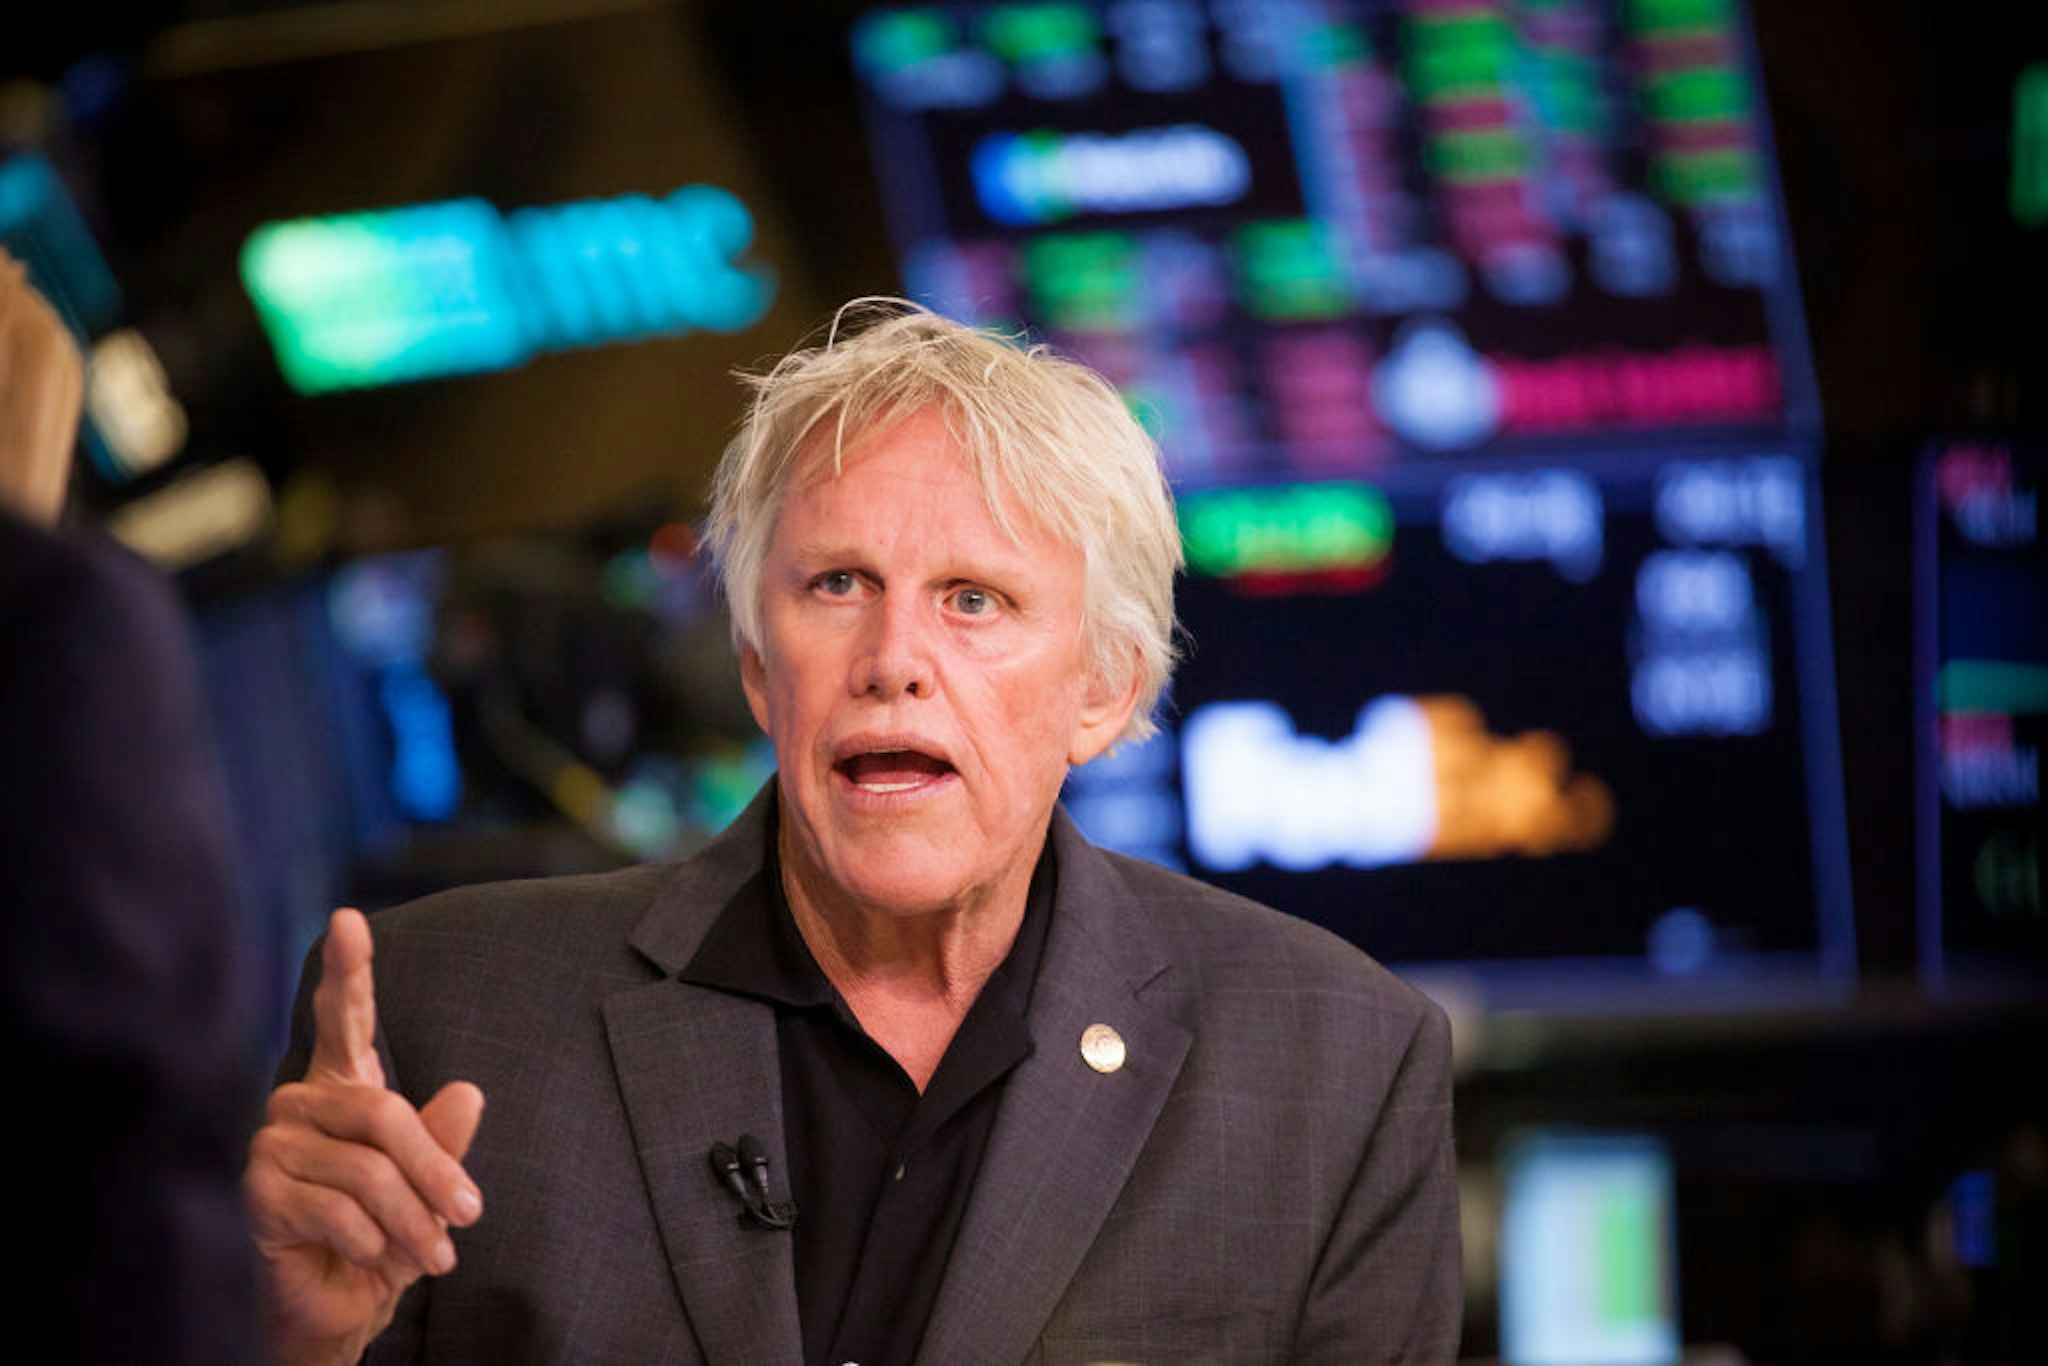 Actor Gary Busey speaks during an interview on the floor of the New York Stock Exchange (NYSE) in New York, U.S., on Tuesday, Sept. 4, 2018. U.S. stocks fell, Treasuries weakened and the dollar climbed as trade tensions persisted and emerging markets remained under pressure. Photographer: Michael Nagle/Bloomberg via Getty Images